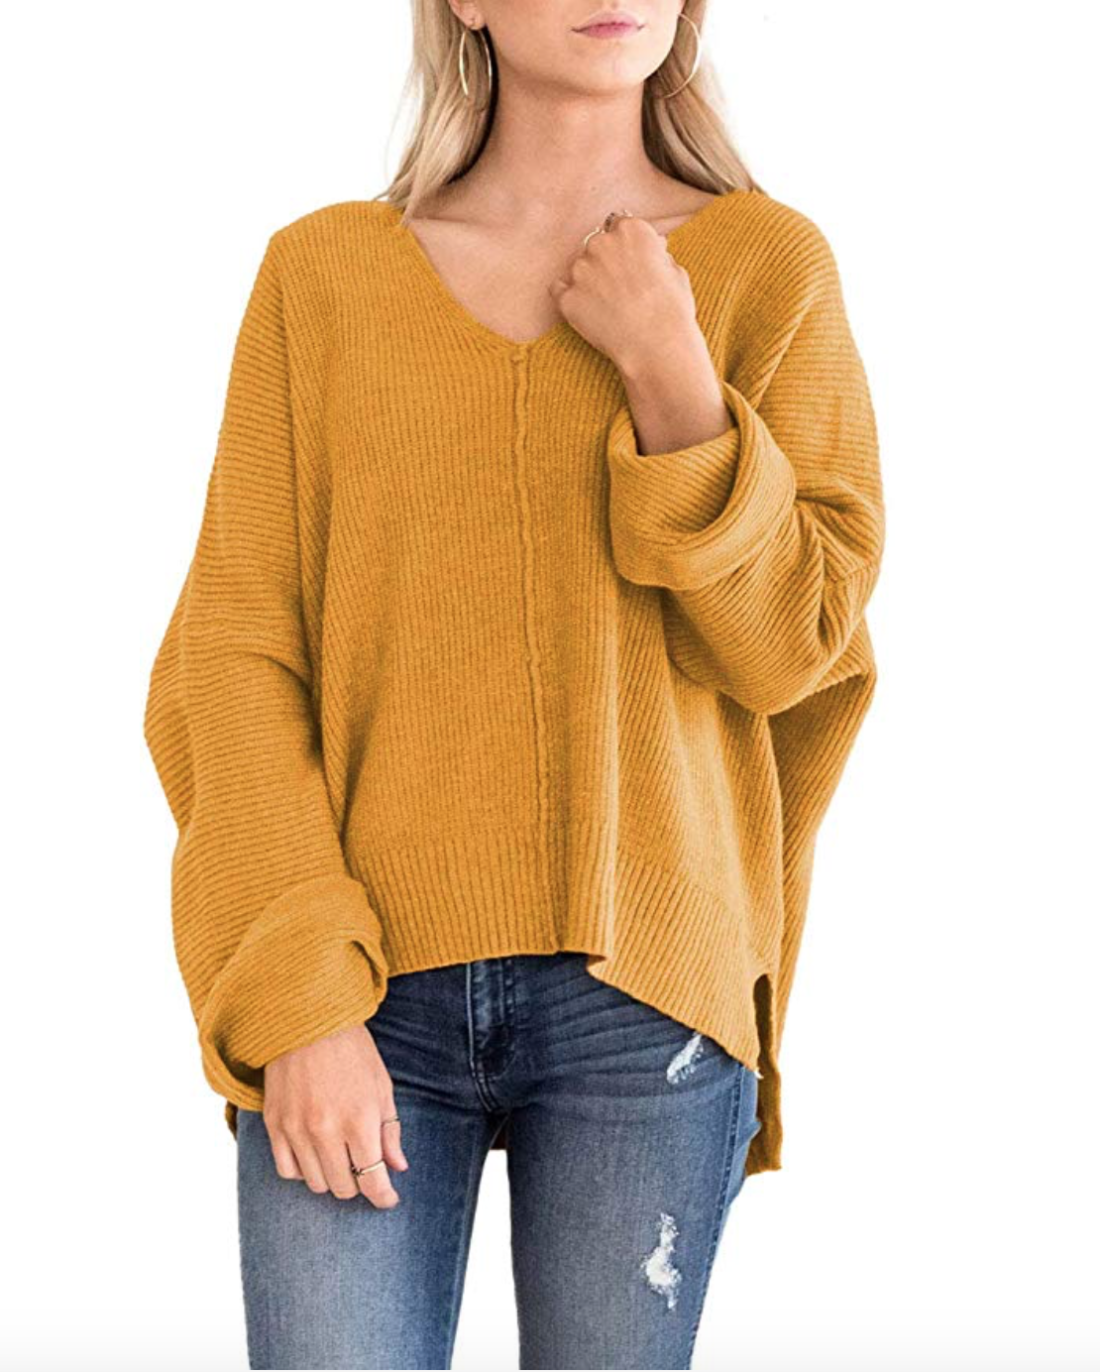 18 Totally Chic Pullover Sweaters and Tunics Under $50 on Amazon ...